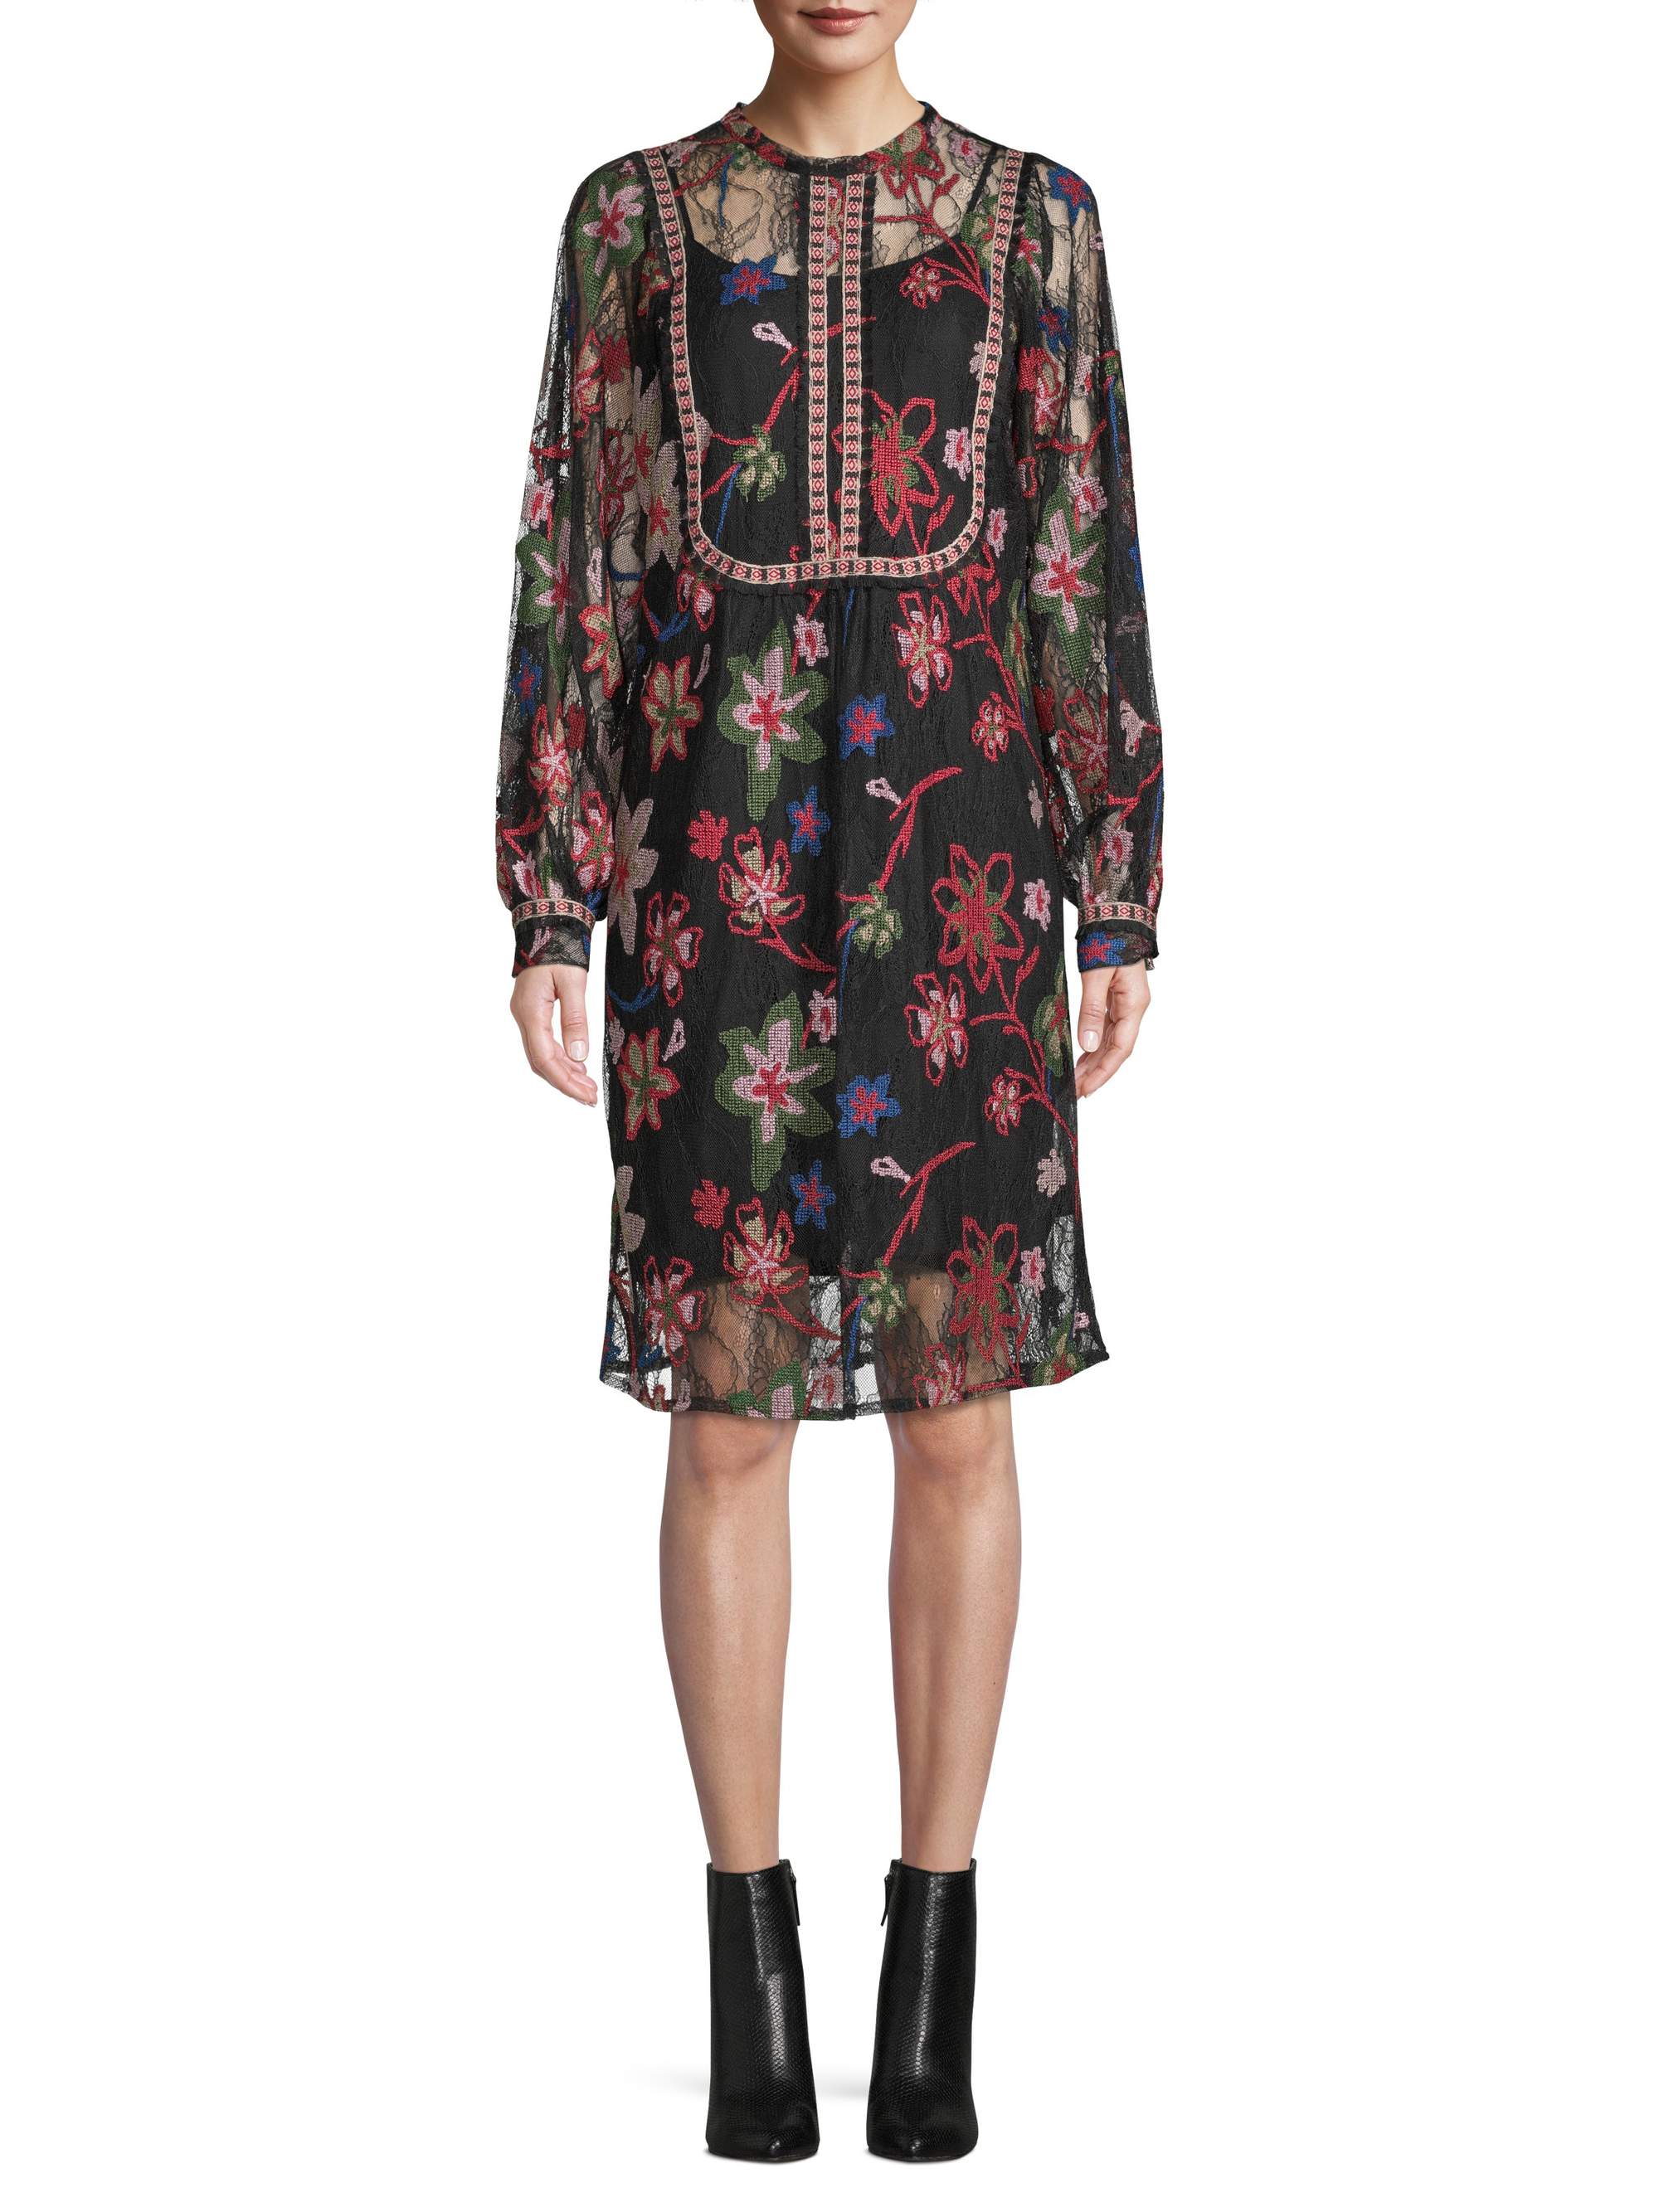 Sui by Anna Sui Women's Floral Embroidered Lace Dress - image 1 of 5